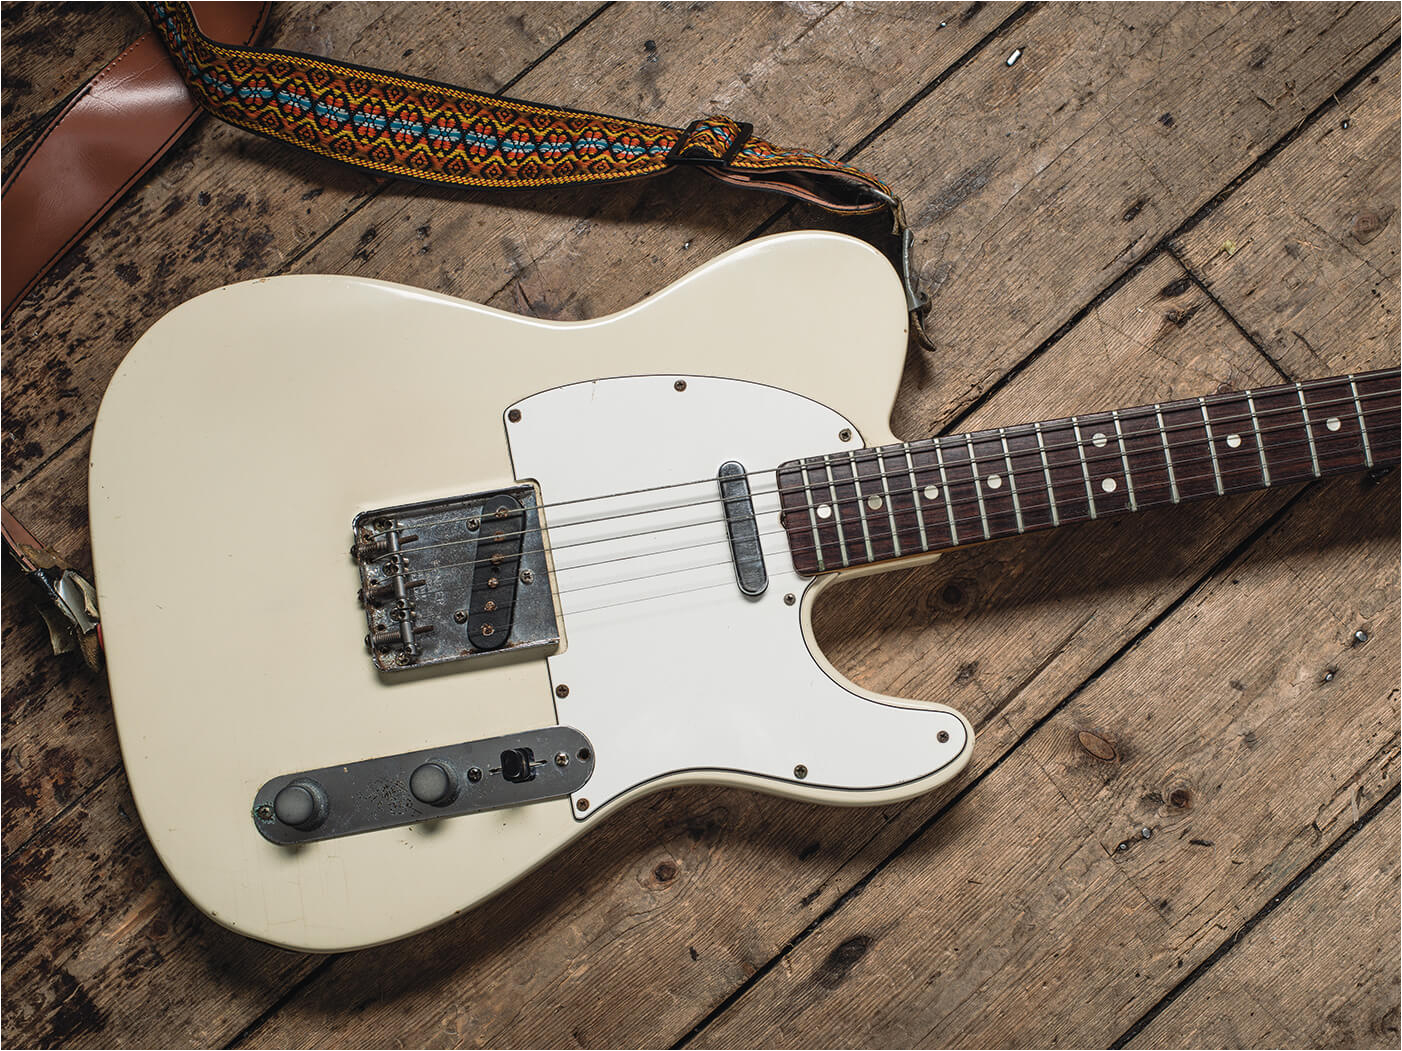 in its purest form the fender telecaster